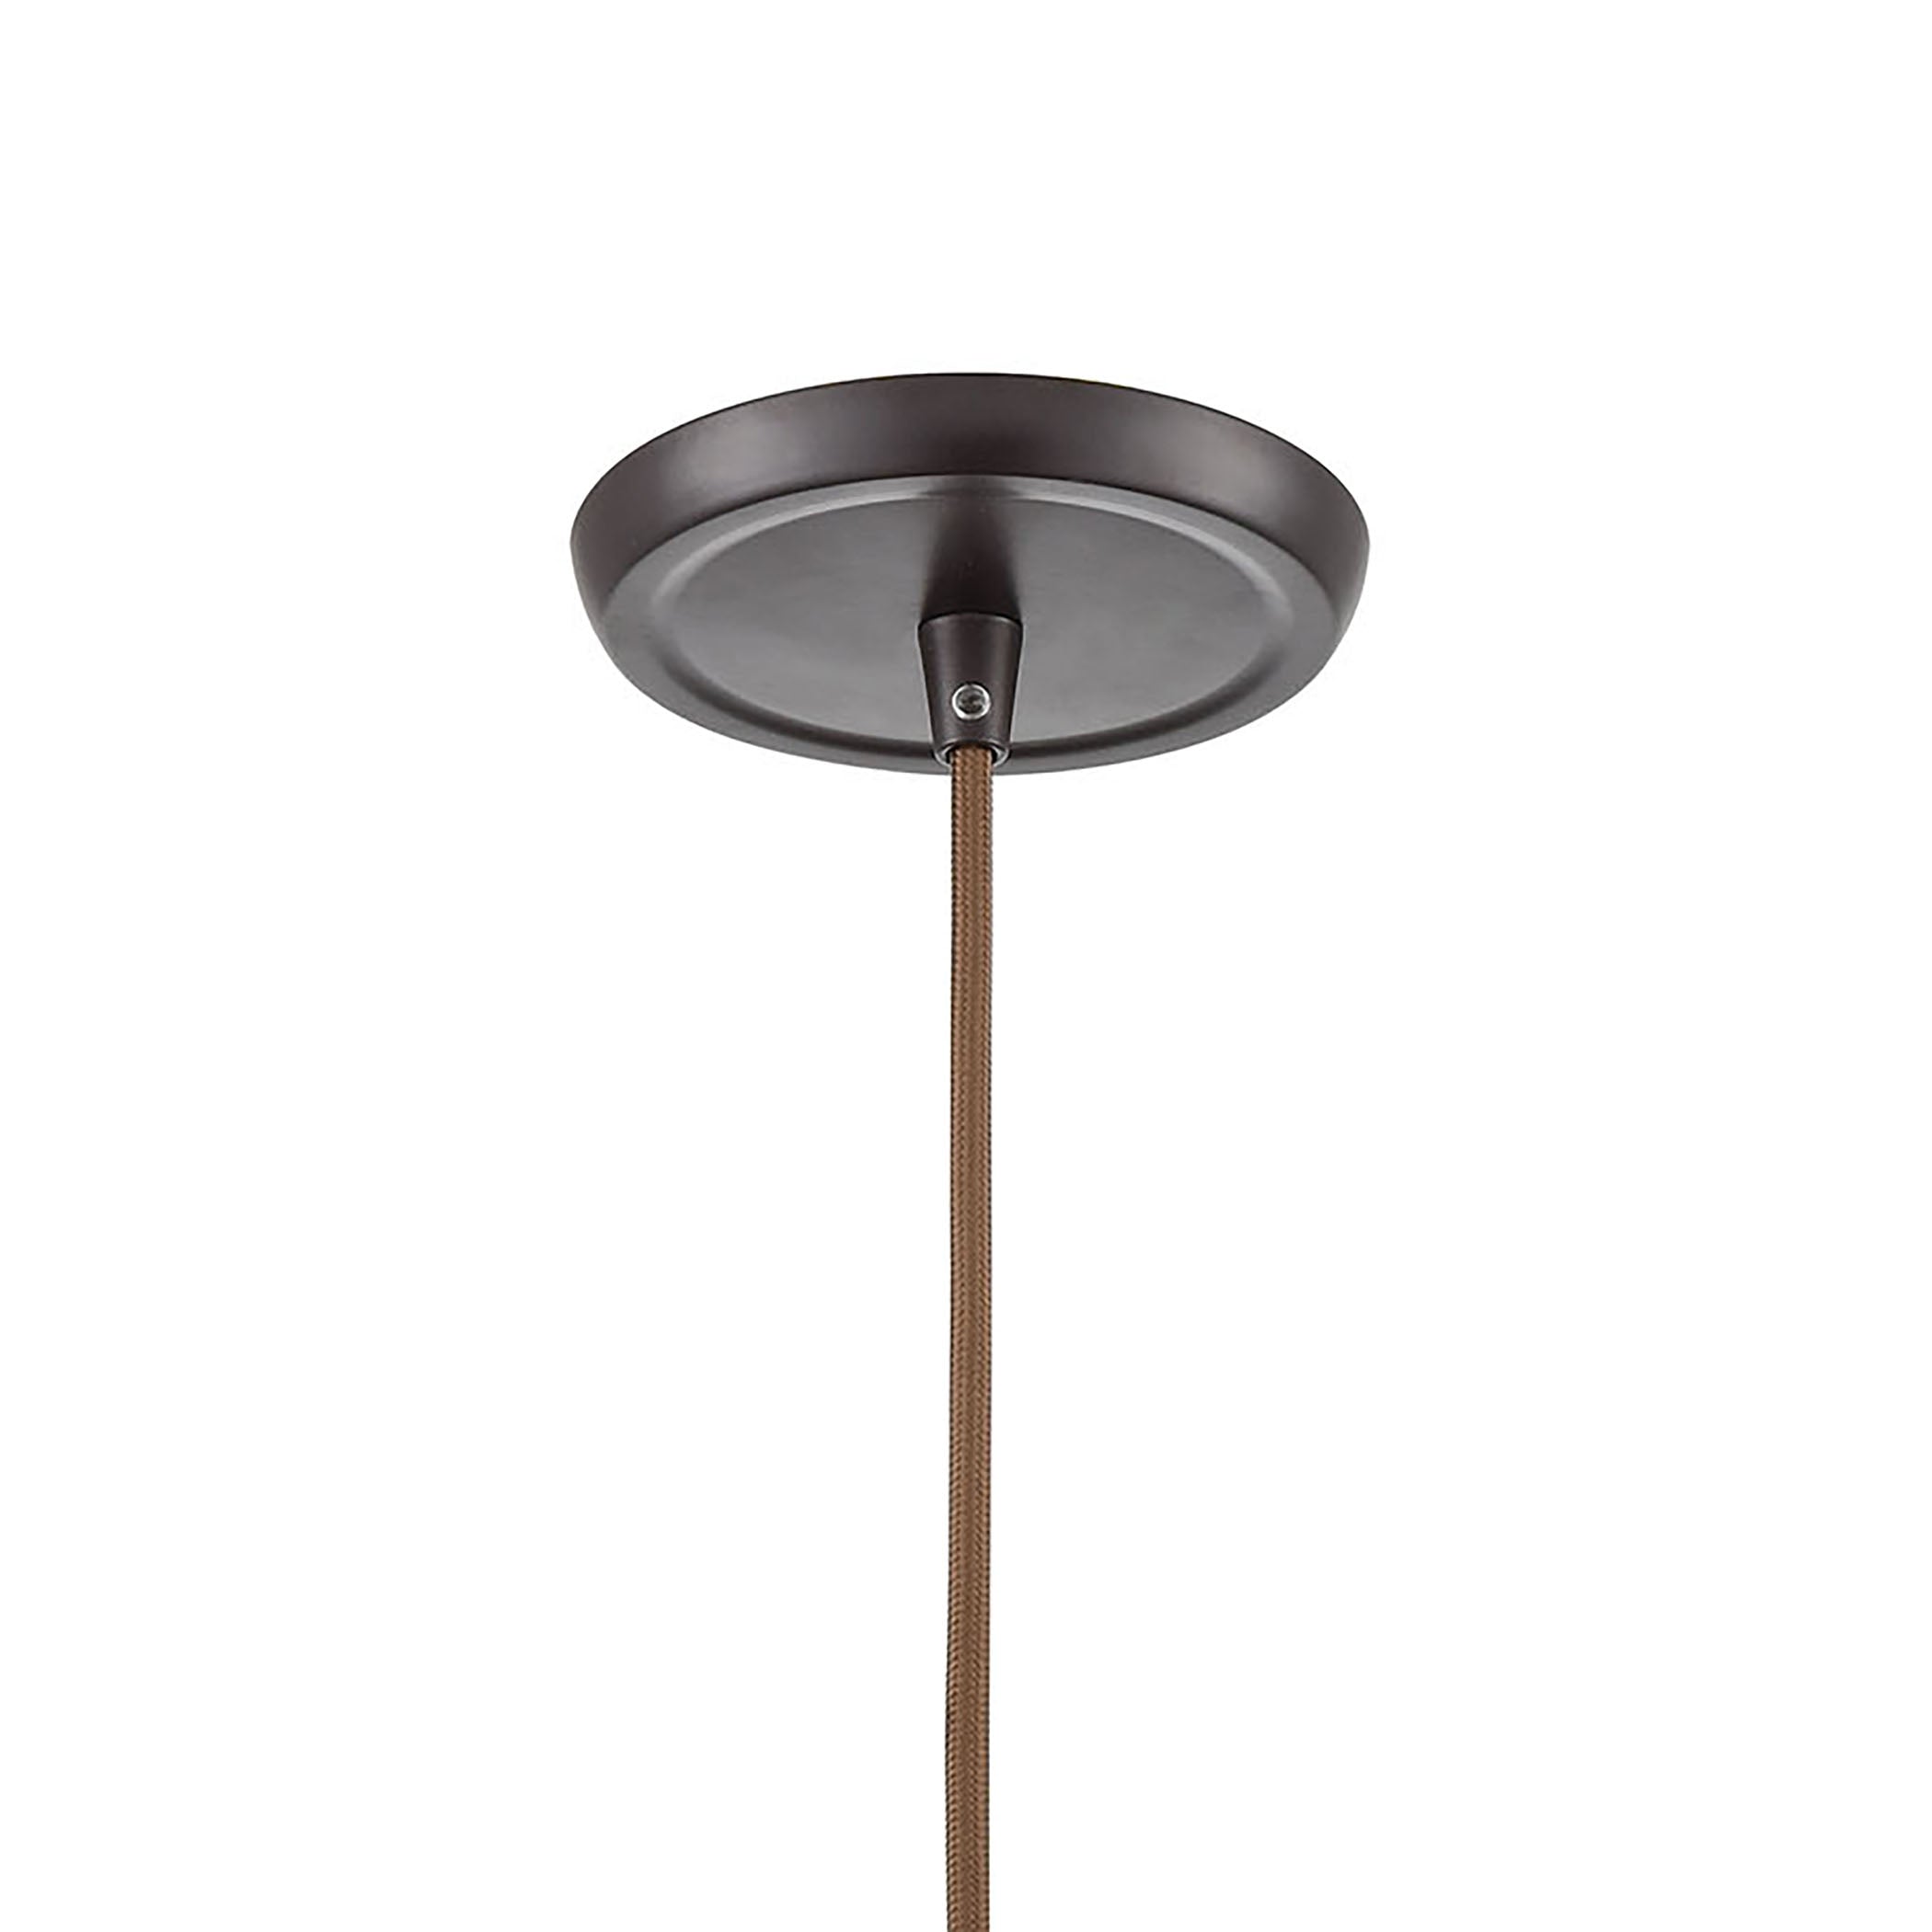 ELK Lighting 85210/1 Kendal 1-Light Mini Pendant in Oil Rubbed Bronze with Patterned Clear Glass